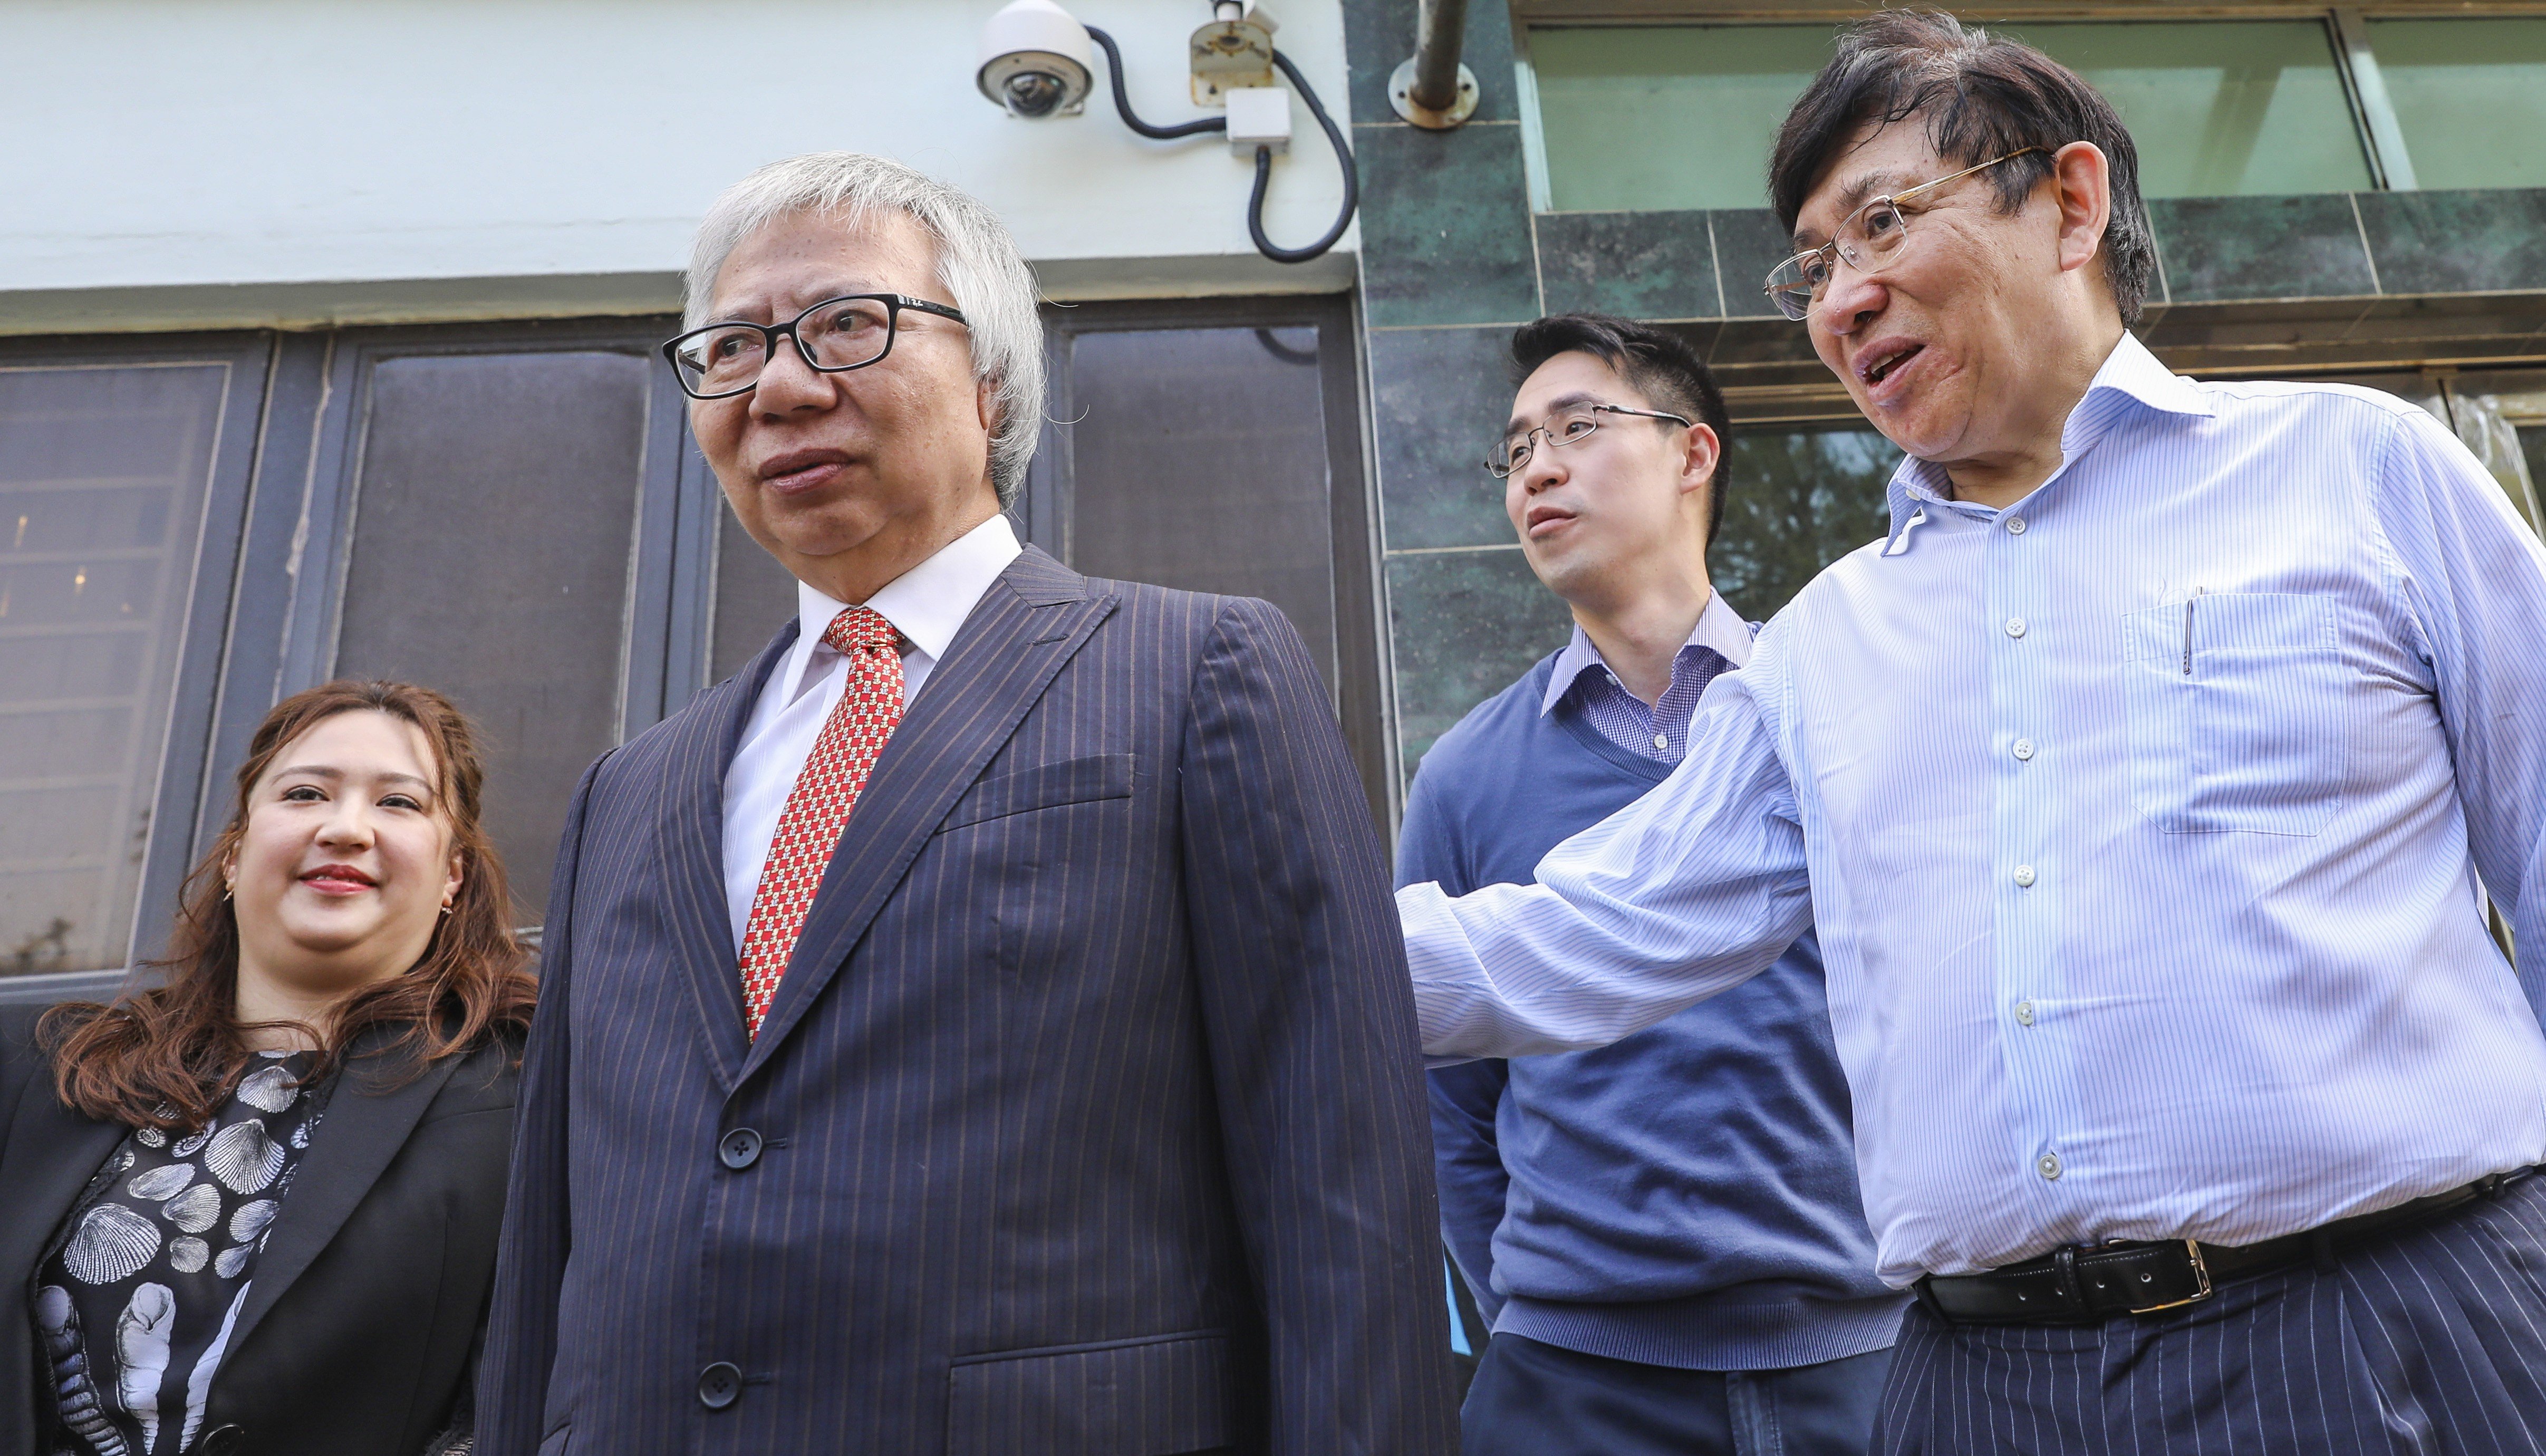 Hong Kong property tycoon Thomas Kwok Ping-kwong (left) is accompanied by his daughter Noelle Kwok, son Adam Kwok Kai-fai and brother Raymond Kwok Ping-luen (right) after his release from Stanley Prison in March 2019. Photo: Sam Tsang